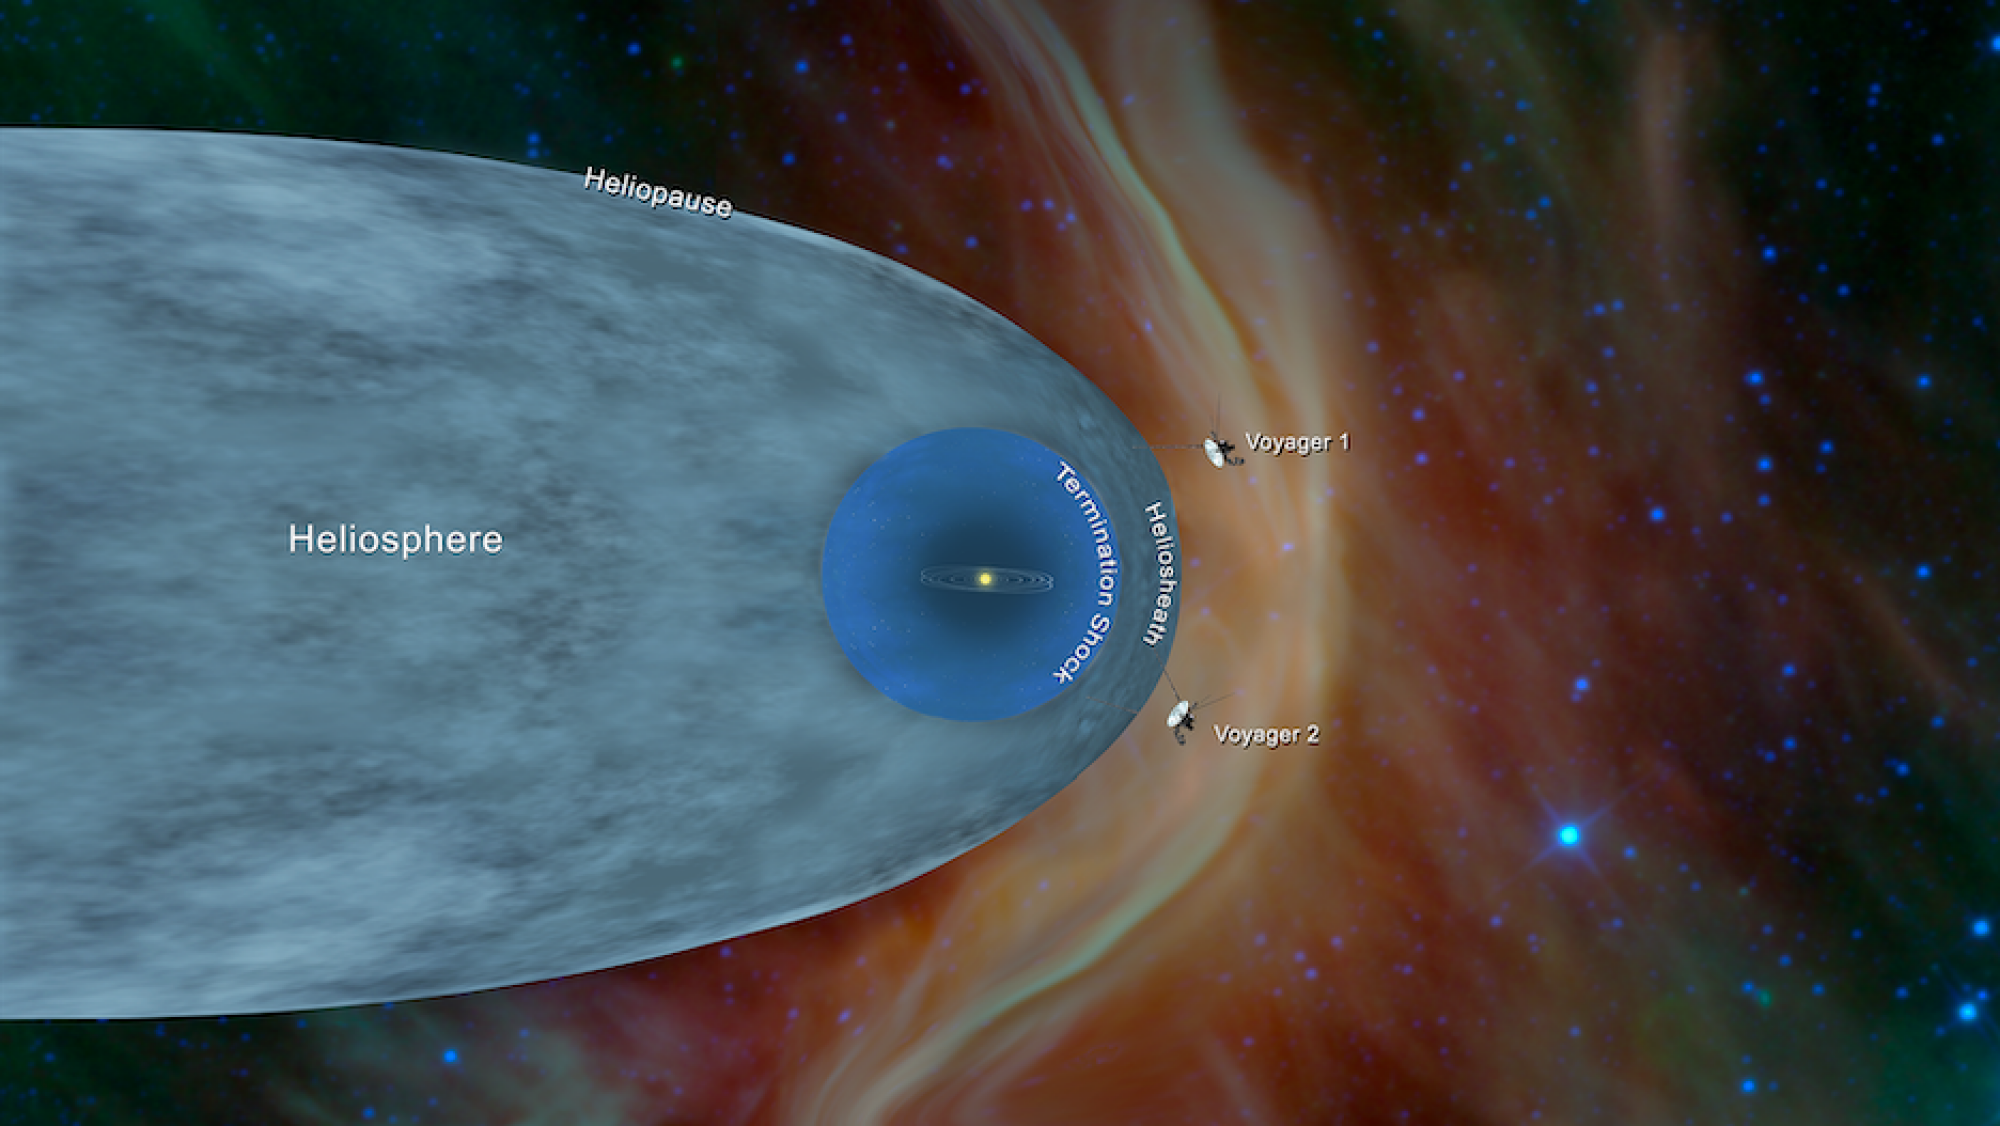 A graphic showing Voyager 1 and 2 having traveled beyond the sun's partially protective heliosphere, and into interstellar space.